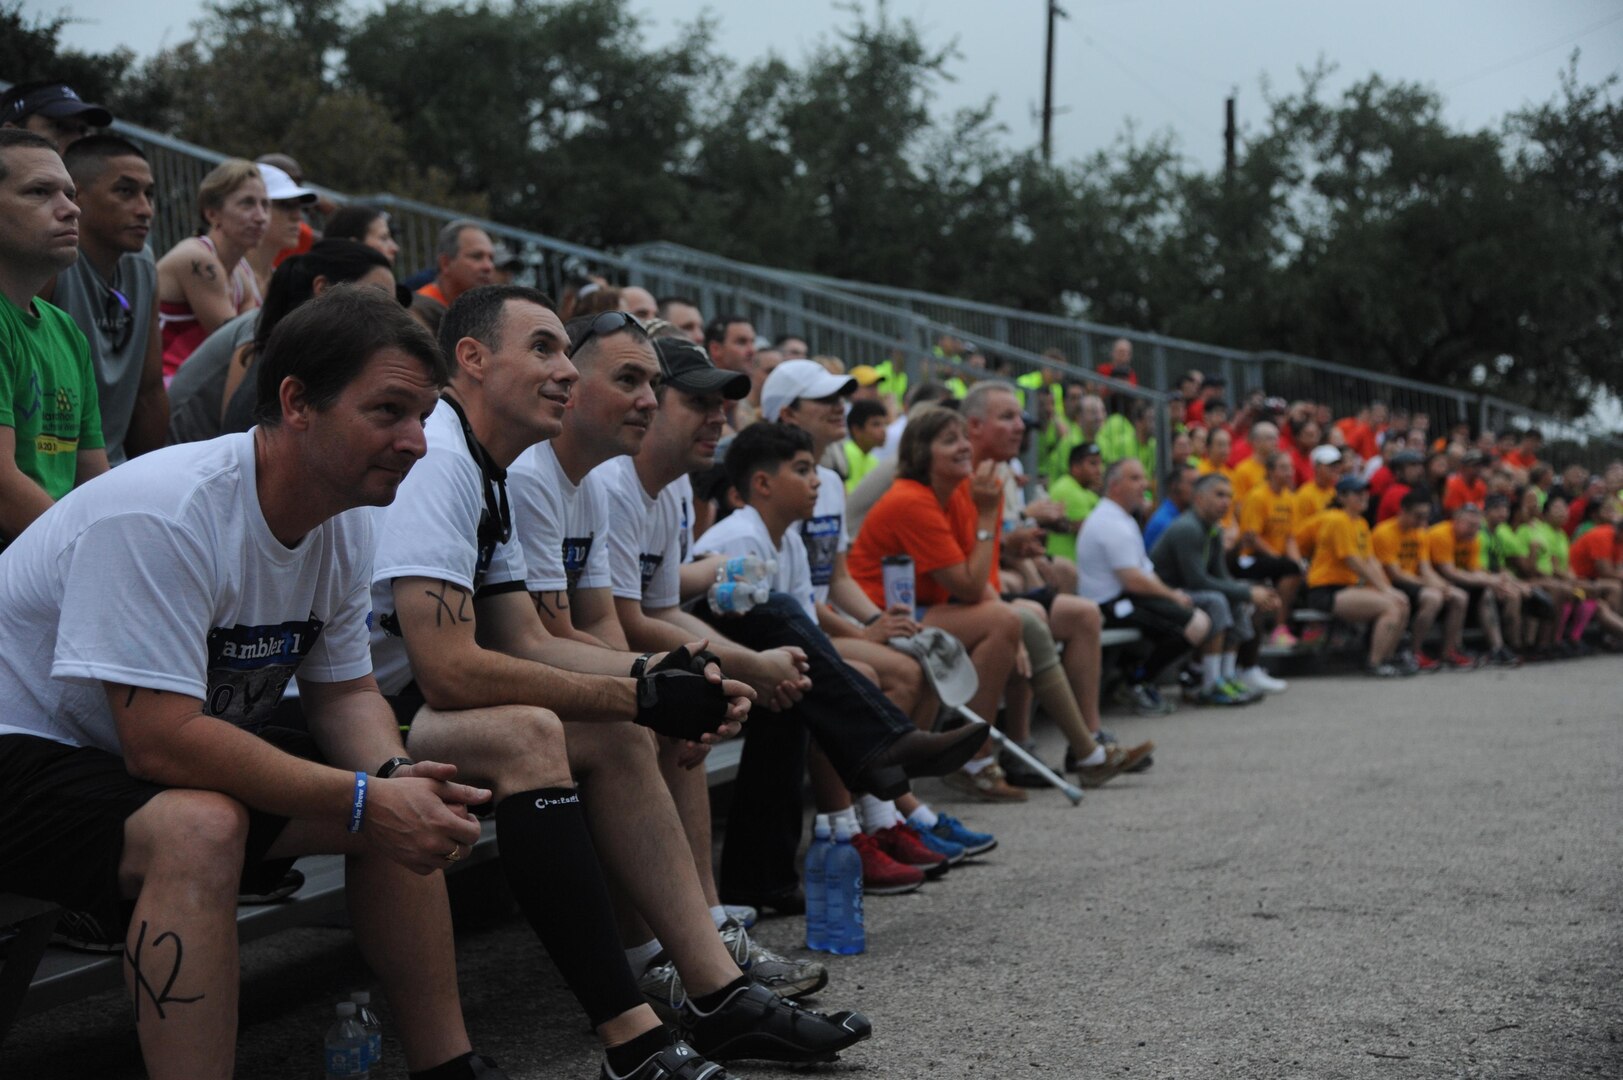 Competitors at the Rambler 120 gather for a safety briefing before the start of the race Sept. 20, 2014, at Joint Base San Antonio Recreation Park at Canyon Lake. The race included a 22-mile bike ride, 10-mile run and 2-mile raft event. (U.S. Air Force photo by Airman 1st Class Stormy Archer)